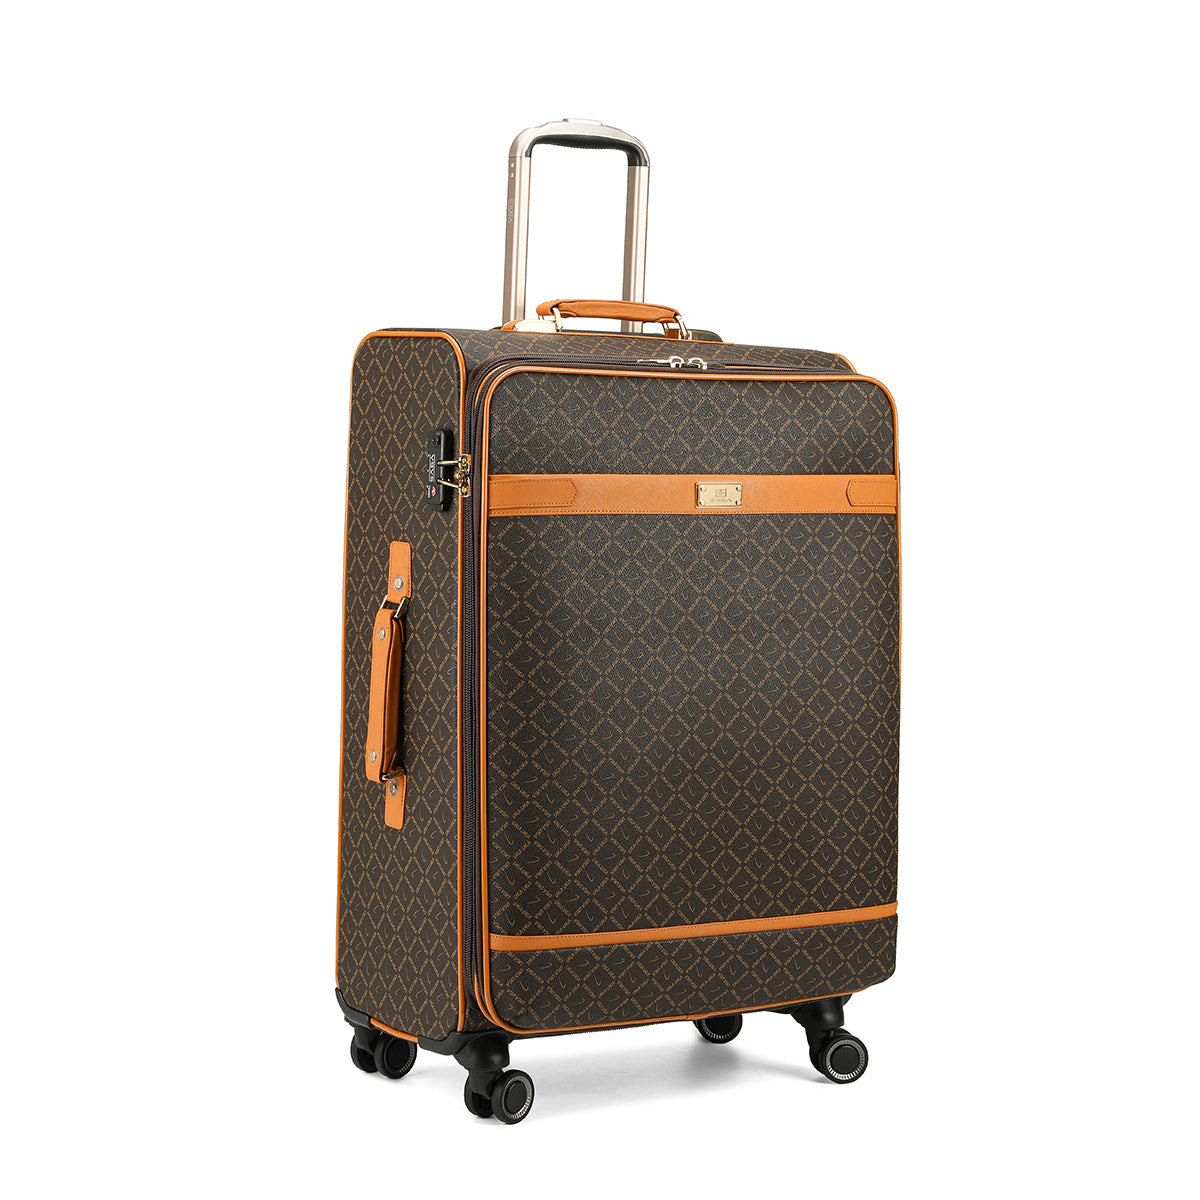 Luxurious travel bags suitcases in several sizes, brown color